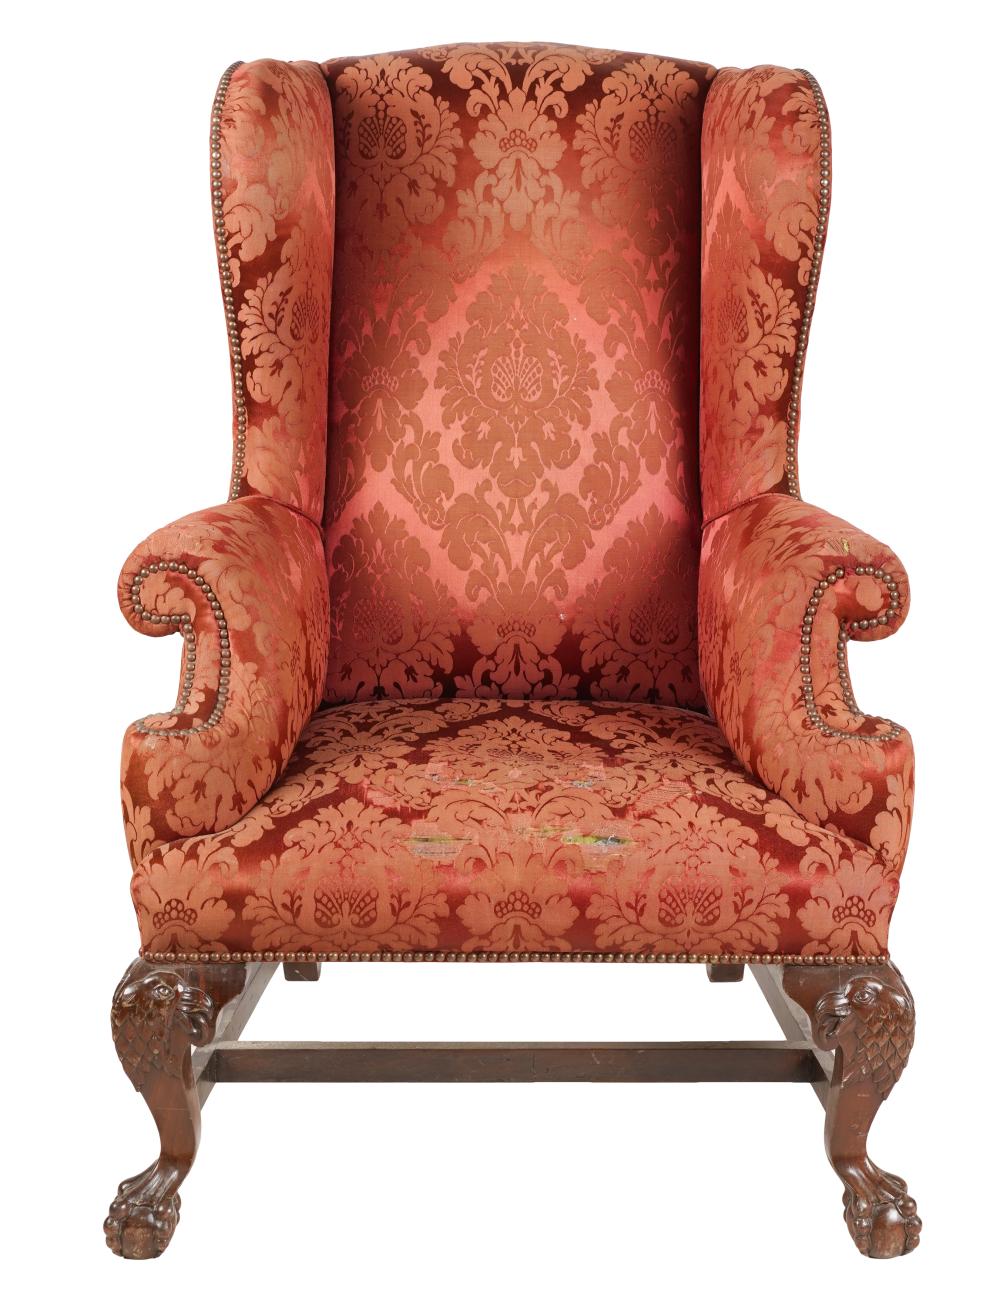 CHIPPENDALE STYLE WING BACK CHAIRcovered 326e86